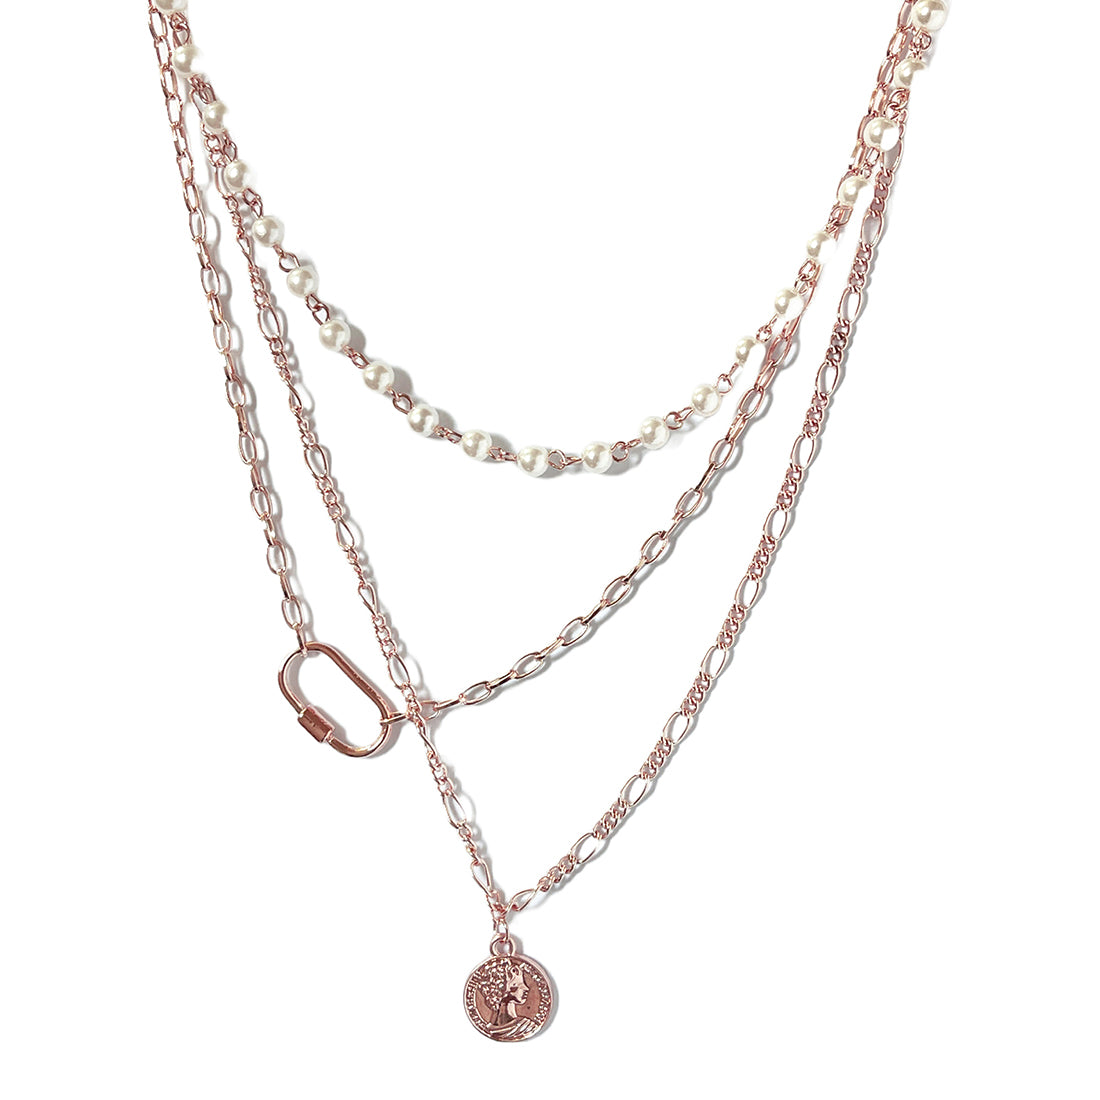 CHUNKY COIN PENDANT PEARL STUDDED CHAIN LINK ROSE GOLD-TONED LAYERED NECKLACE